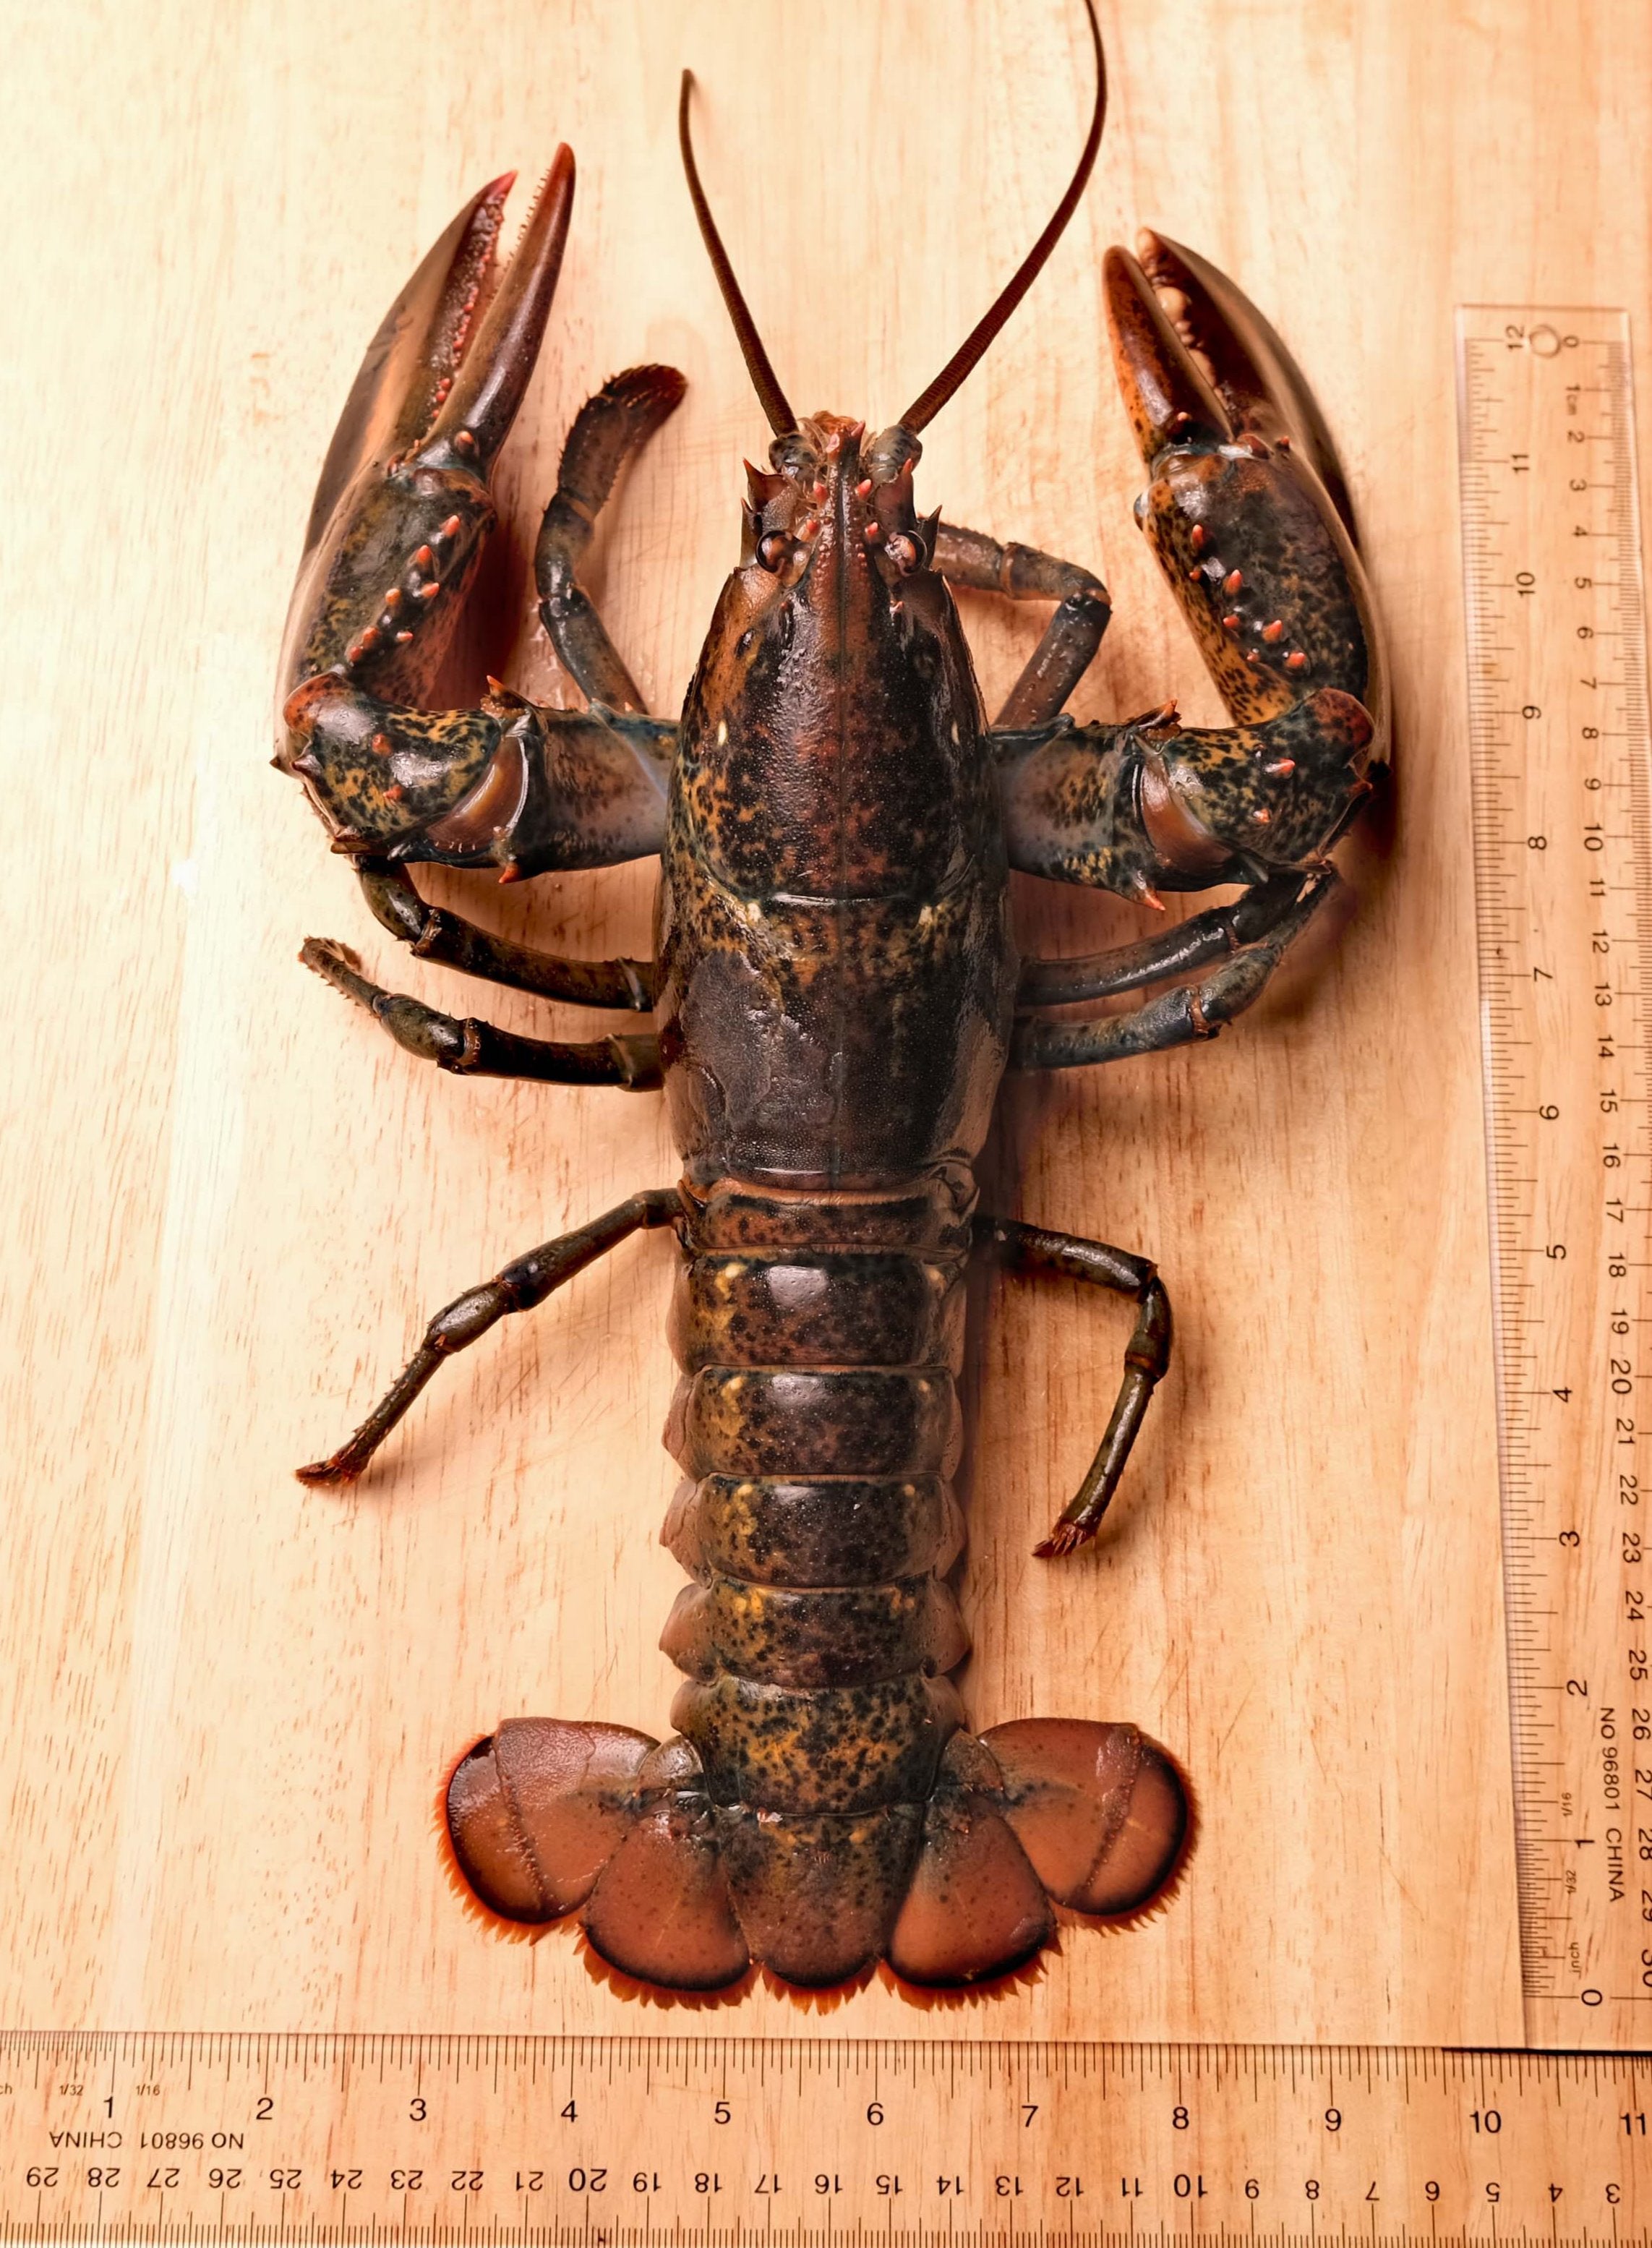 Two Claw Live Lobster 1 25lb Pc 4pc Order Ocean Miracle Online [ 3109 x 2285 Pixel ]